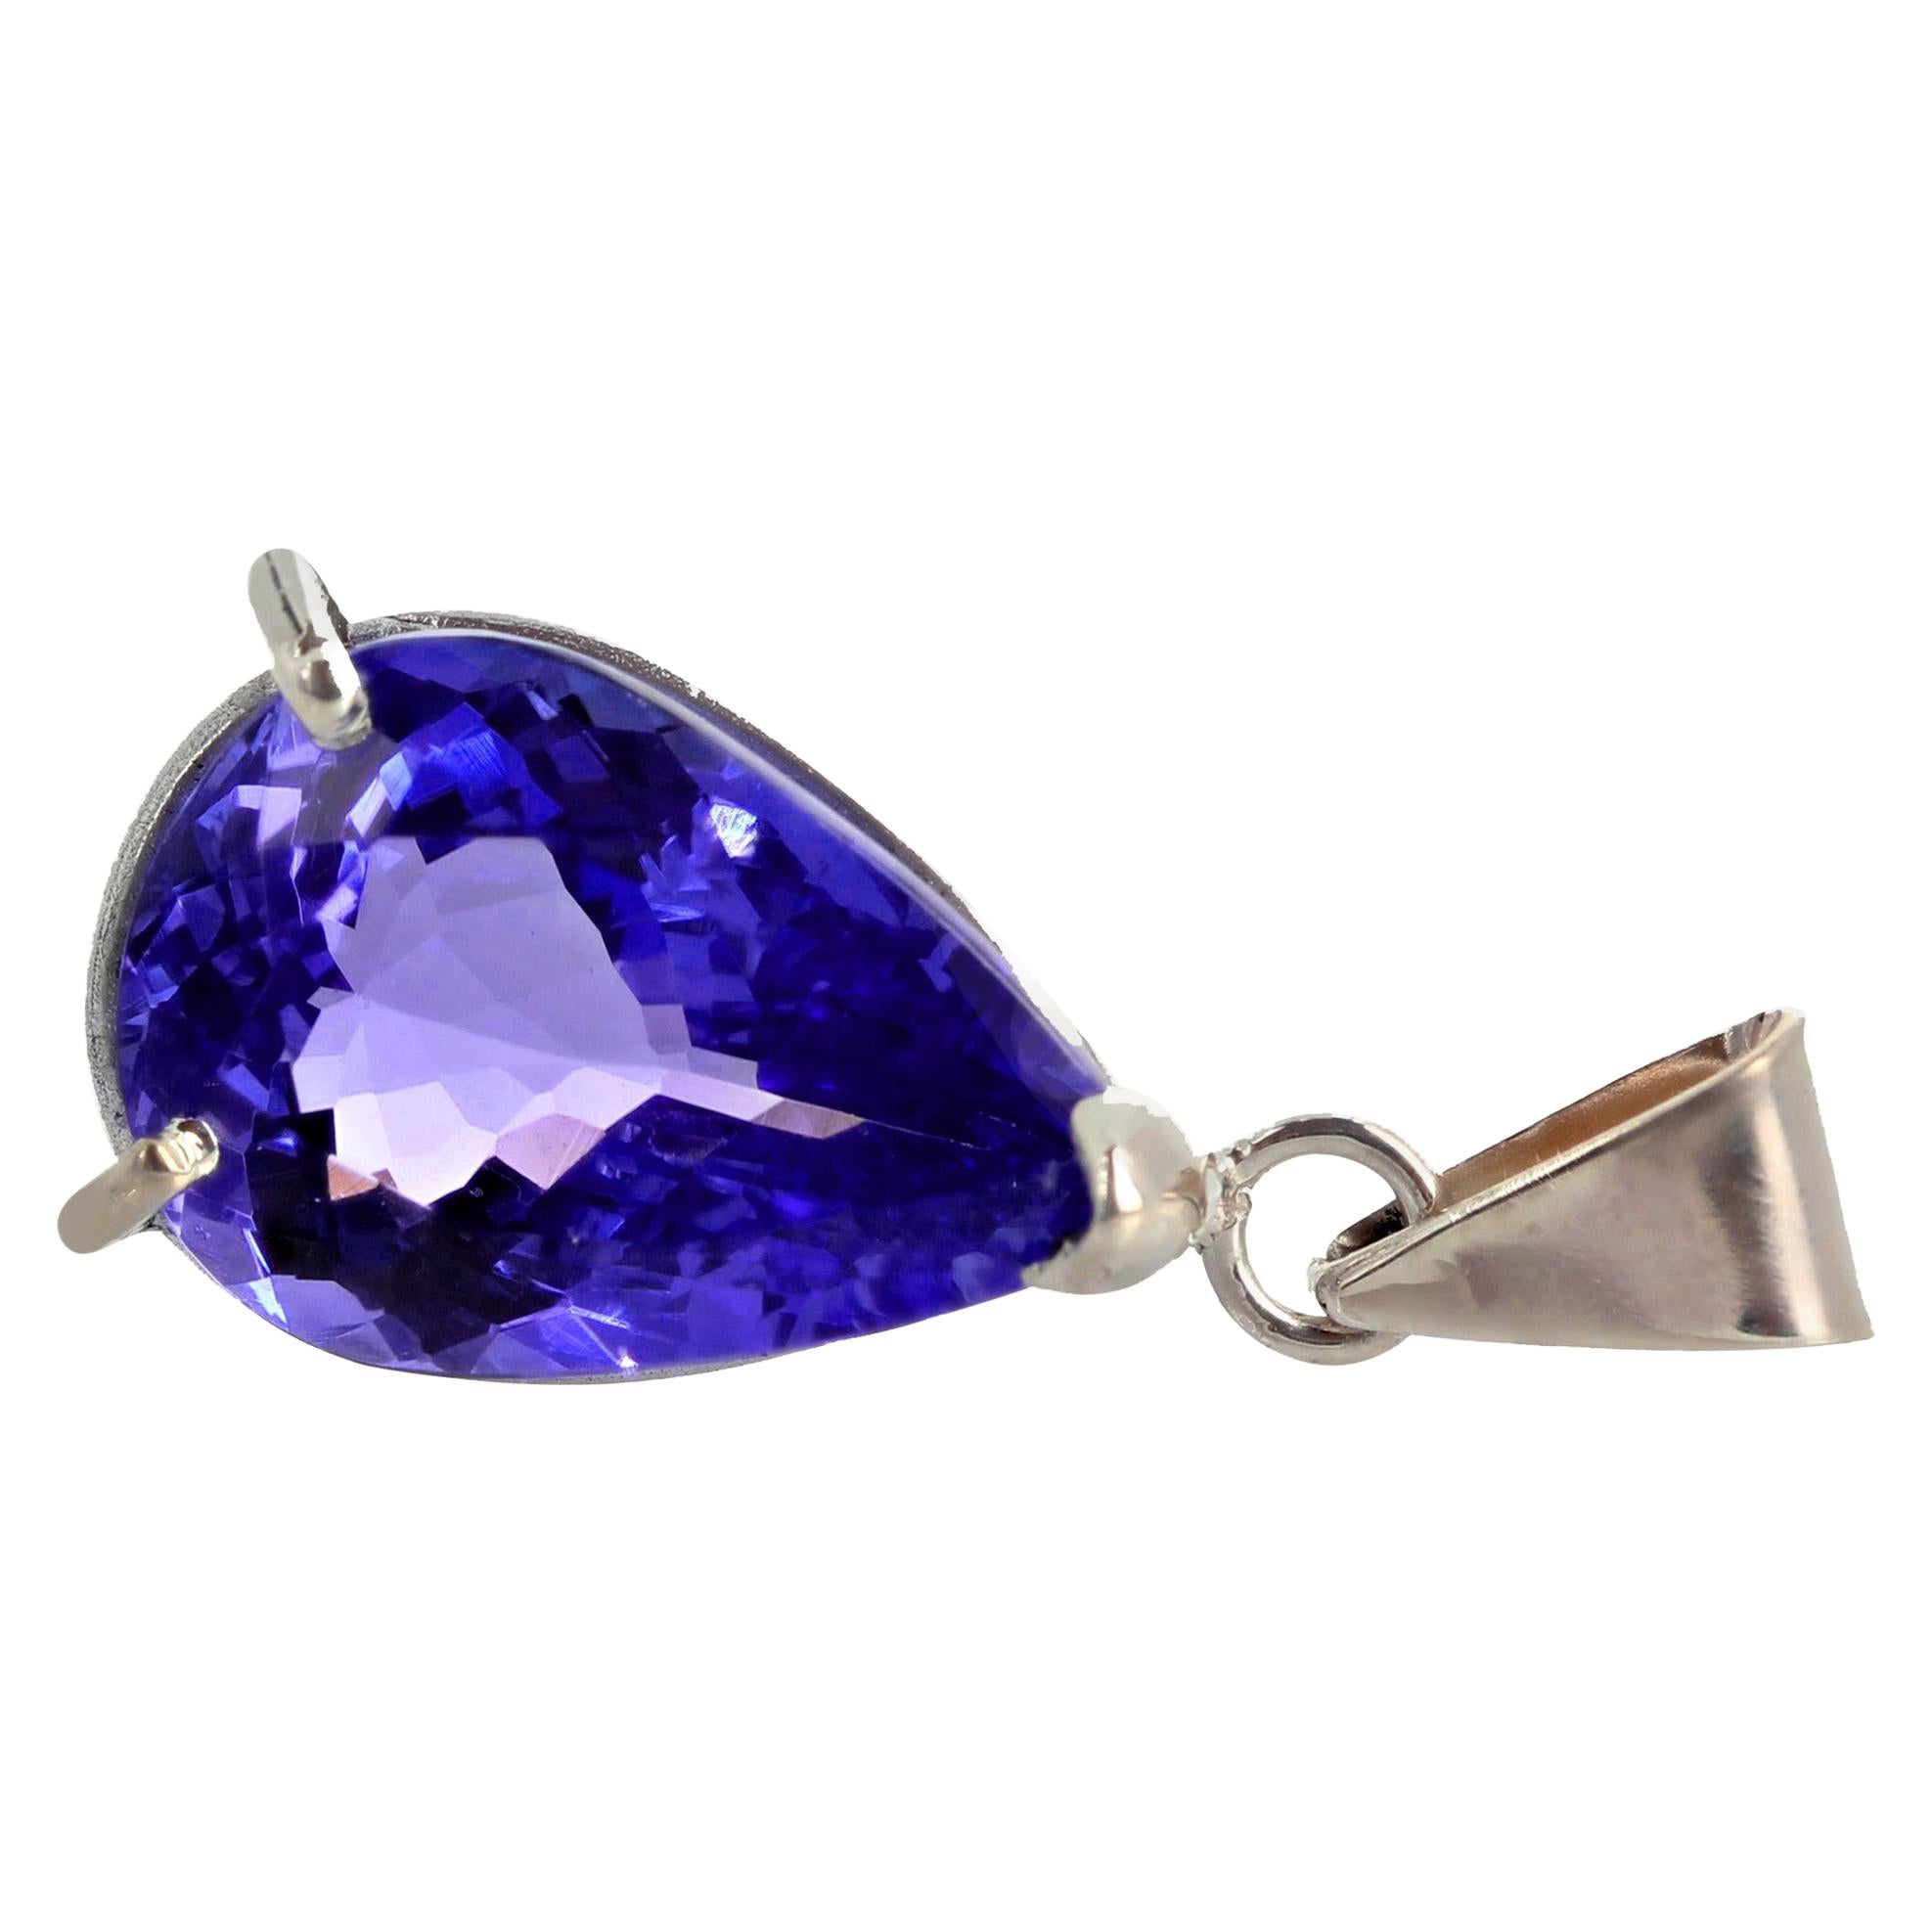 AJD BREATHTAKING Glittering Large REAL 6.9 Ct Tanzanite Sterling Silver Pendant For Sale